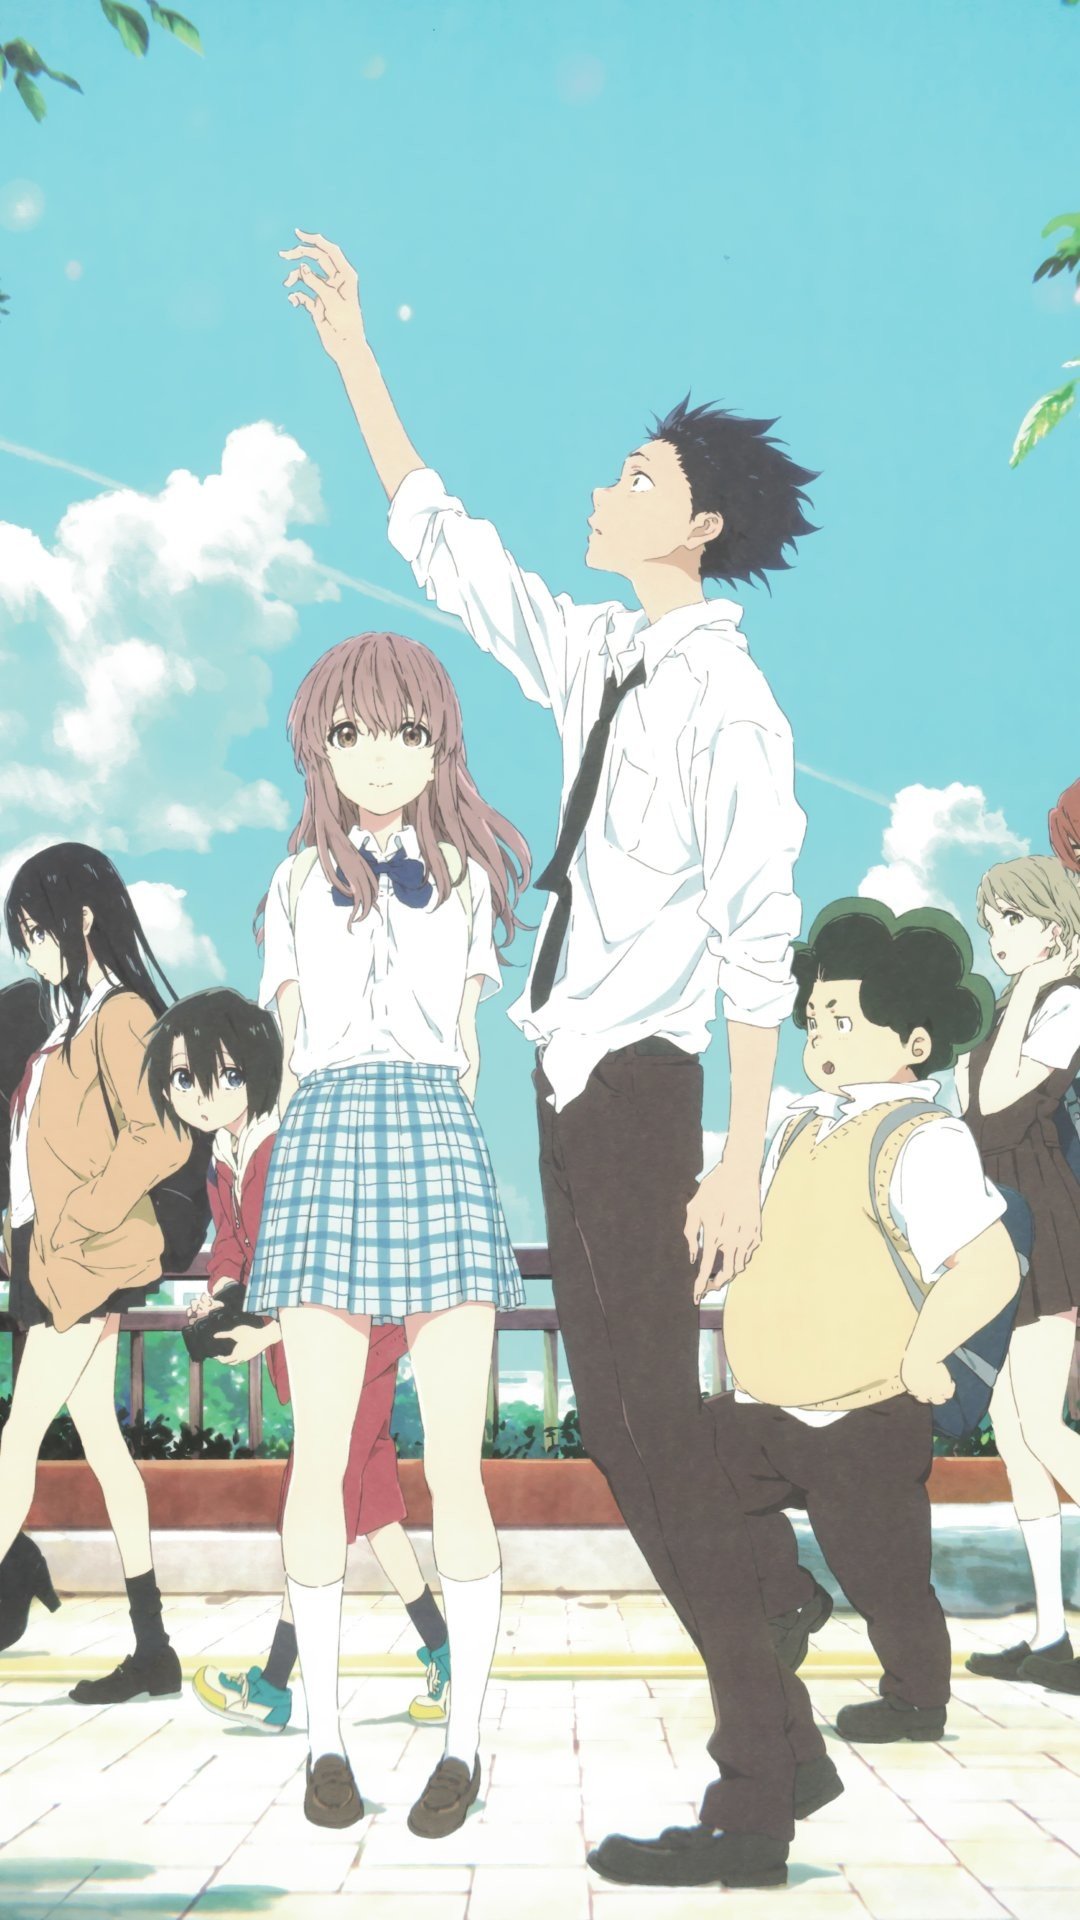 [39+] A Silent Voice Wallpapers on WallpaperSafari